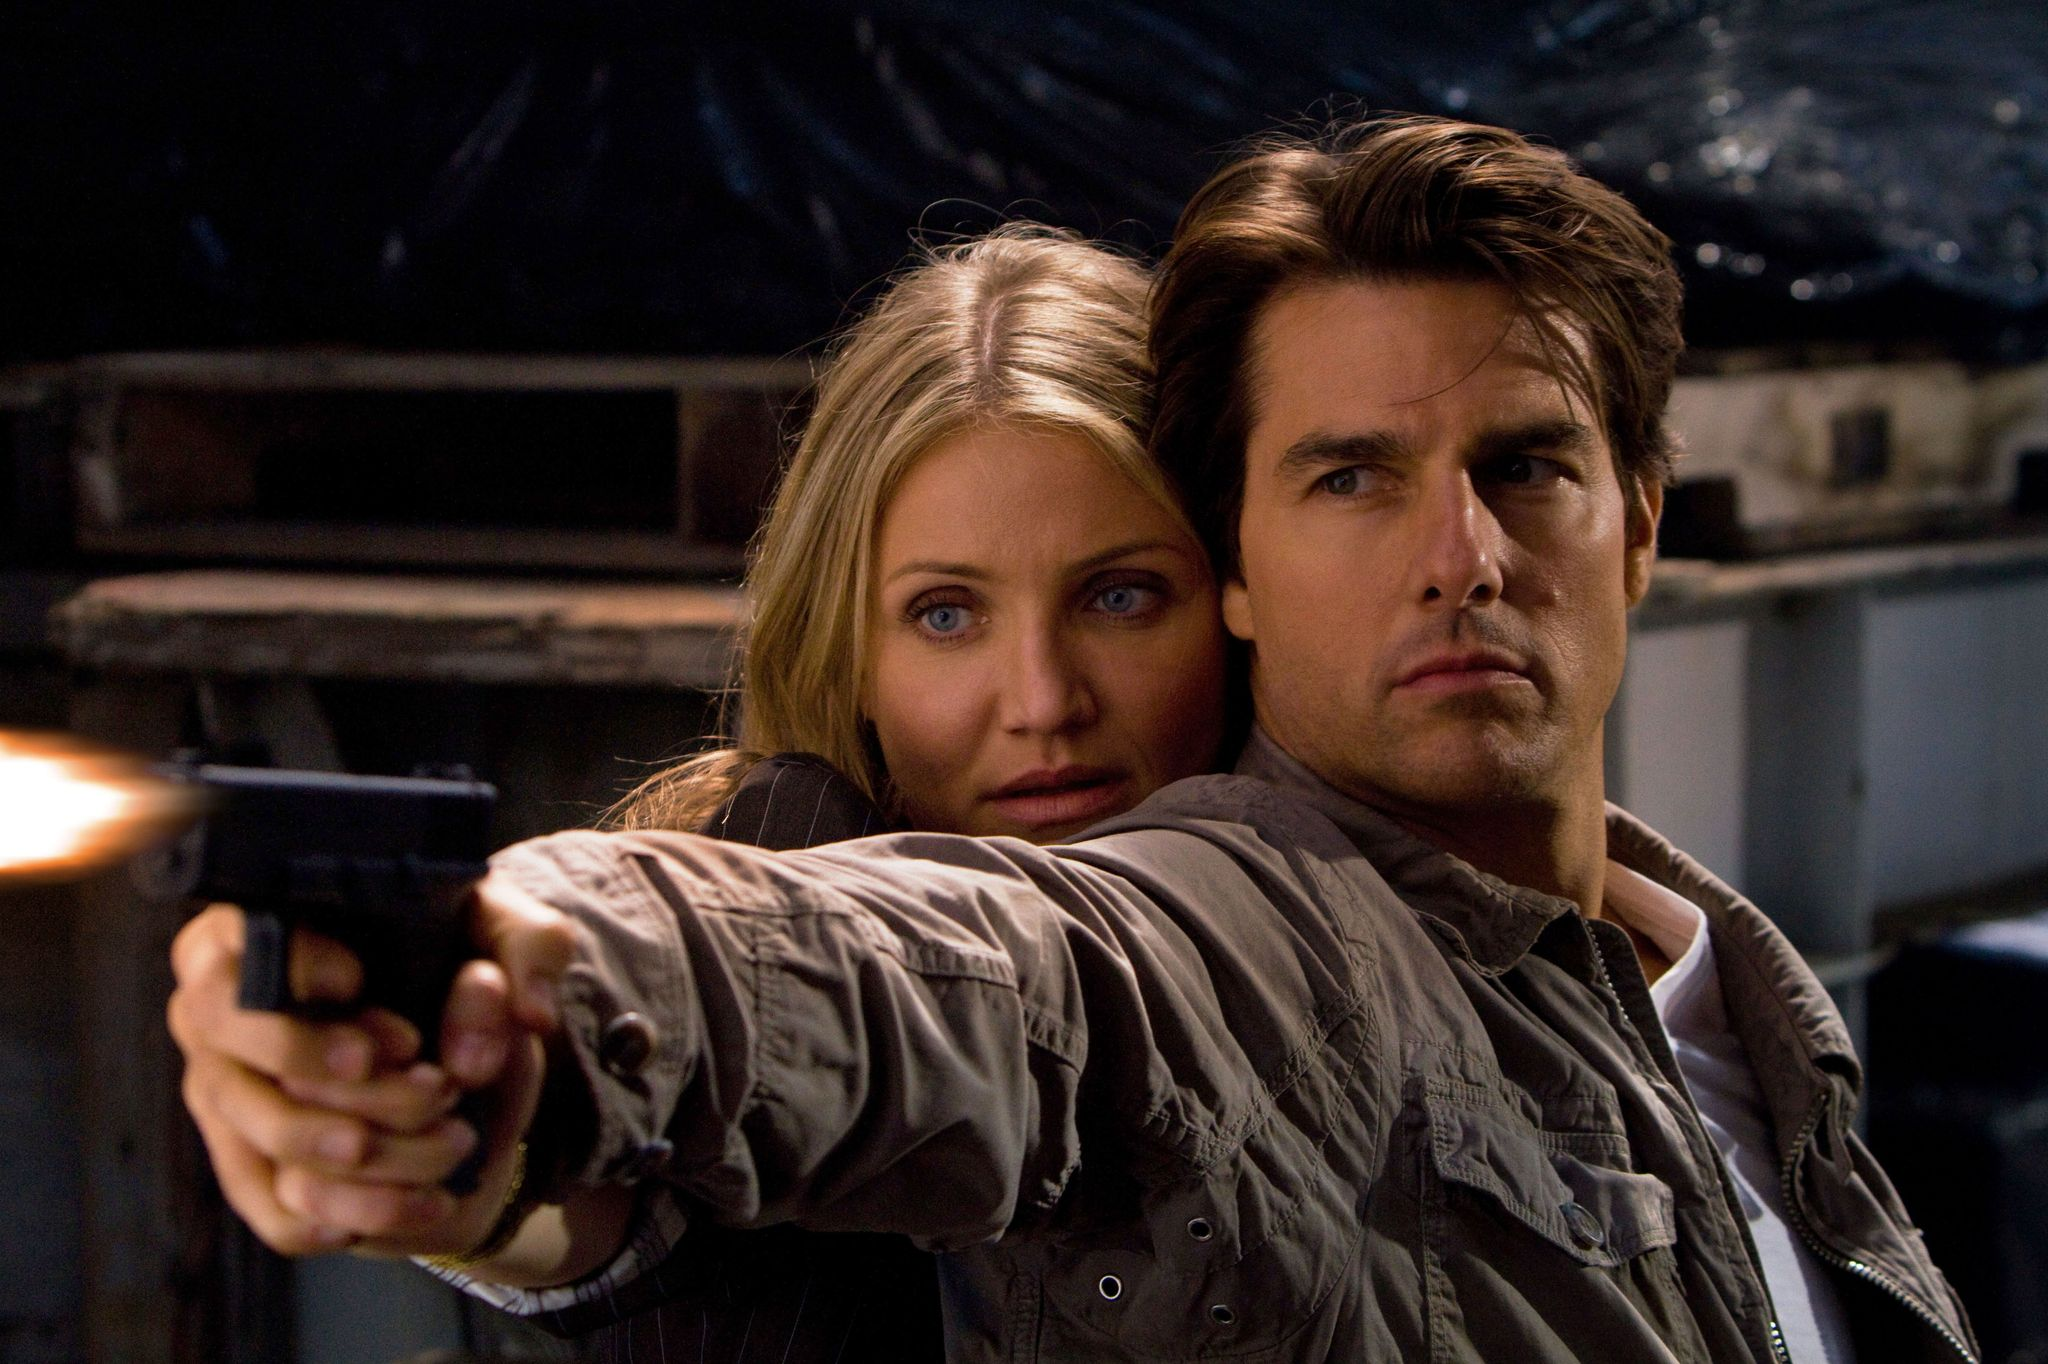 Review: Knight and day (2010)